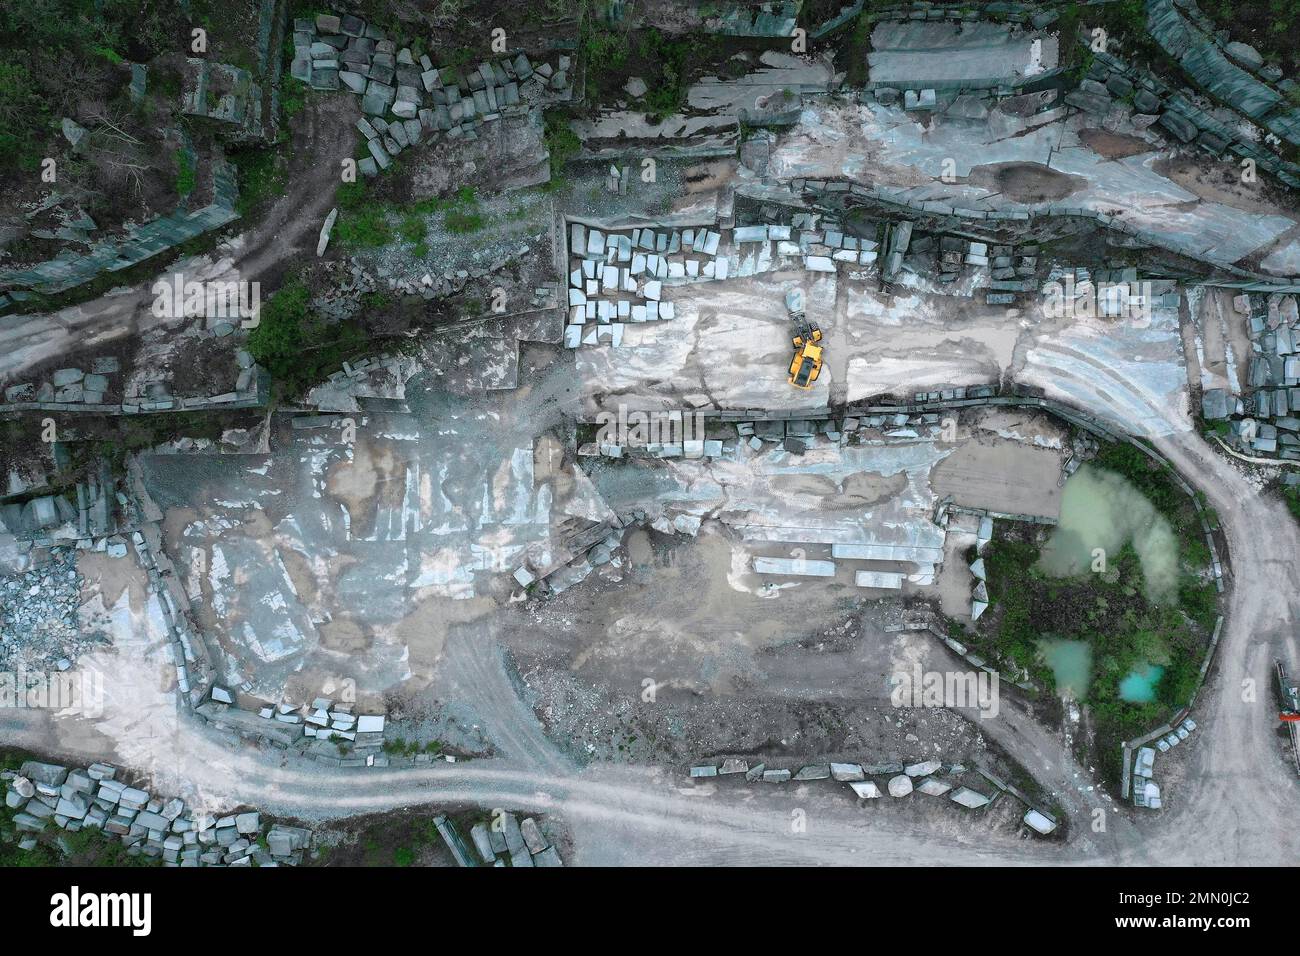 France, Pyrenees Atlantiques, Bearn, Arudy, aerial view of the installations of a marble quarry Stock Photo